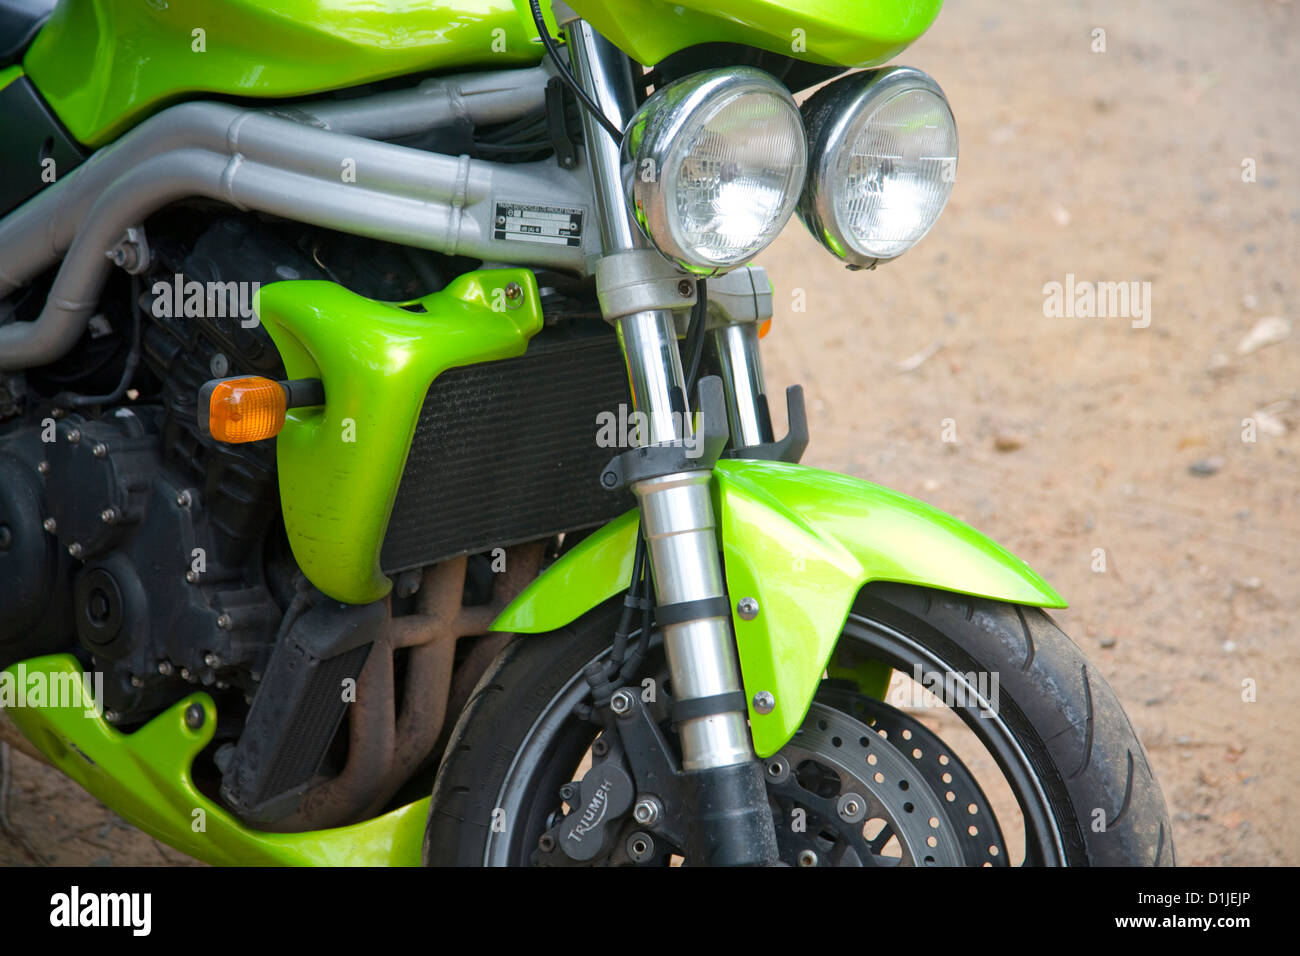 Triumph Speed Triple High Resolution Stock Photography and Images - Alamy